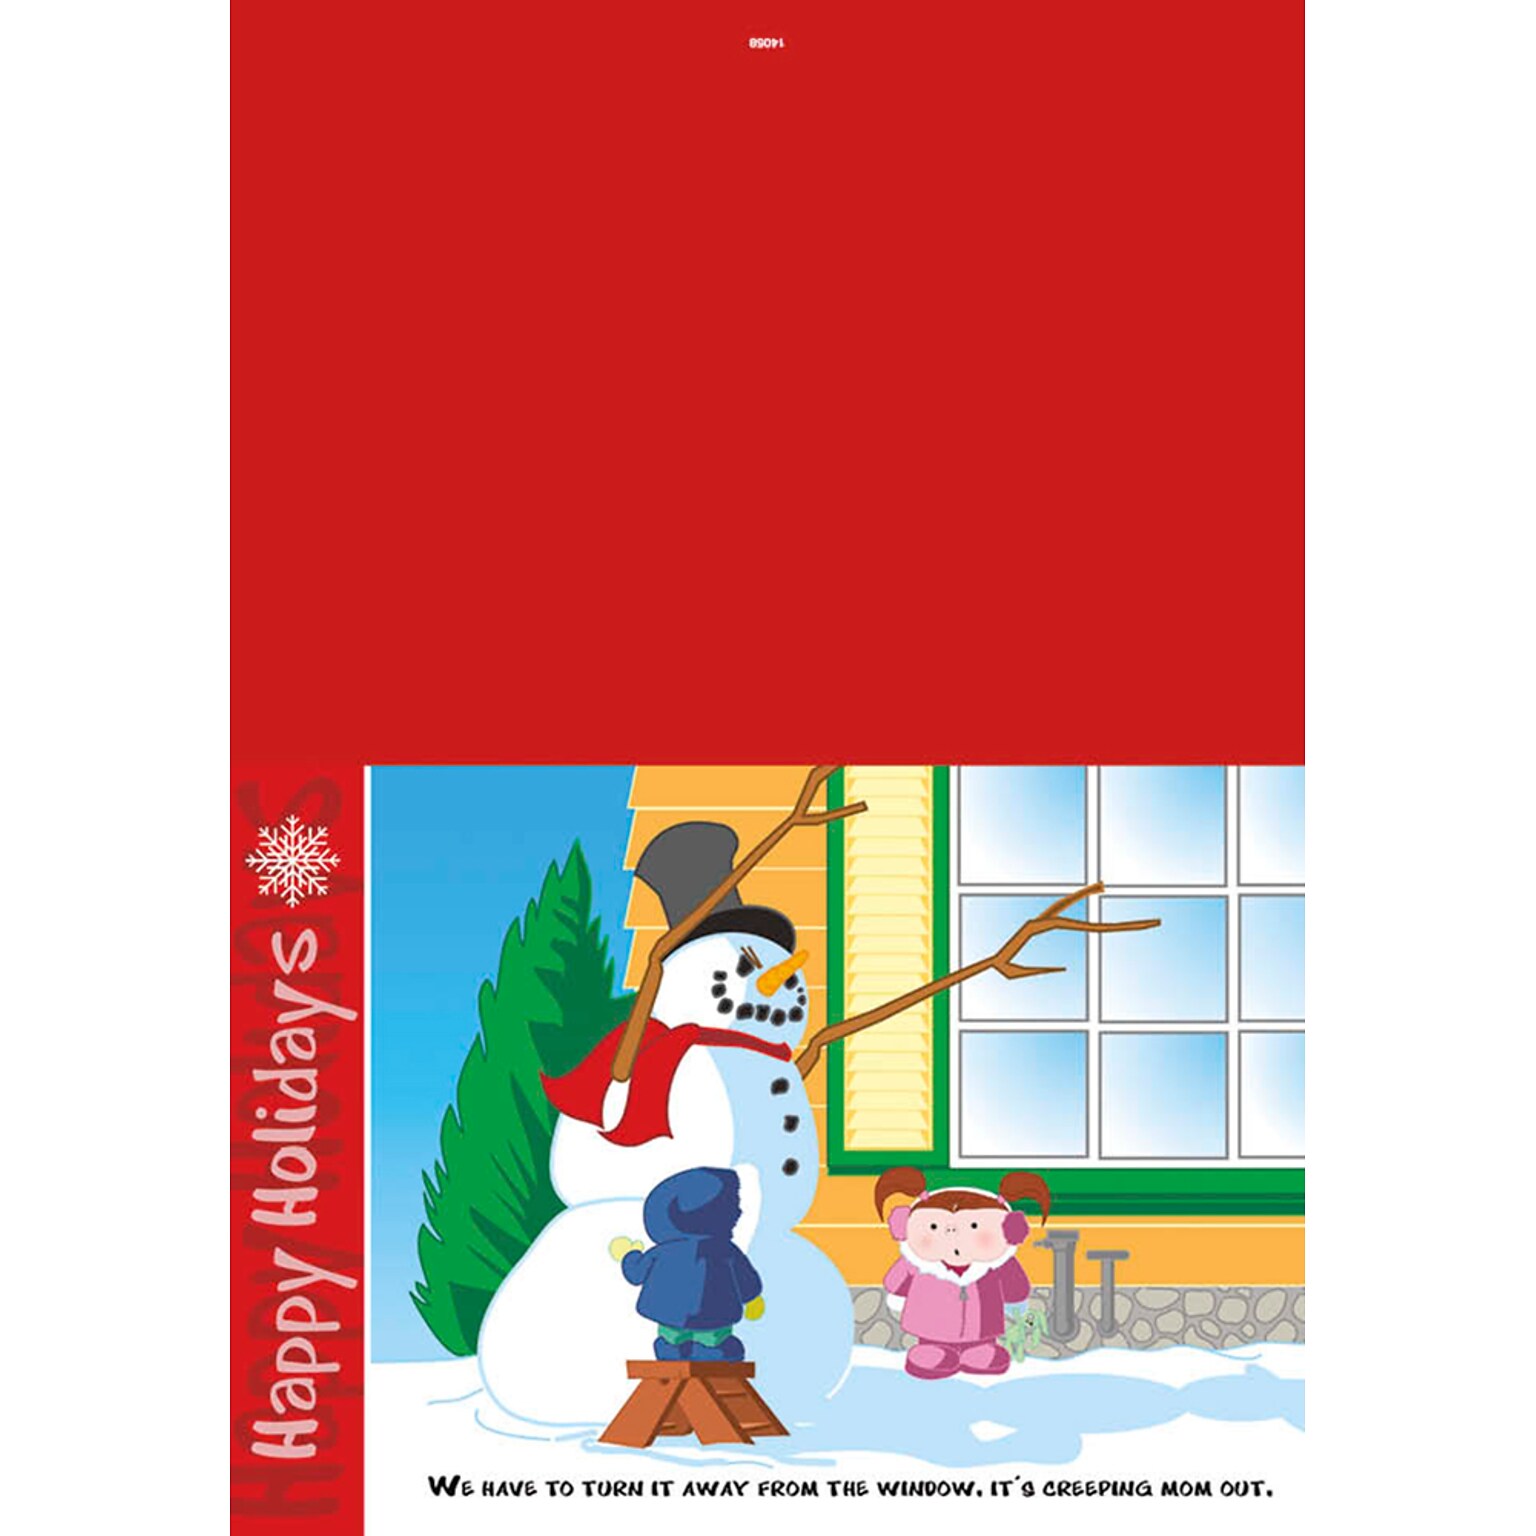 Creepy Snowman with 2 kids - 7 x 10 scored for folding to 7 x 5, 25 cards w/A7 envelopes per set